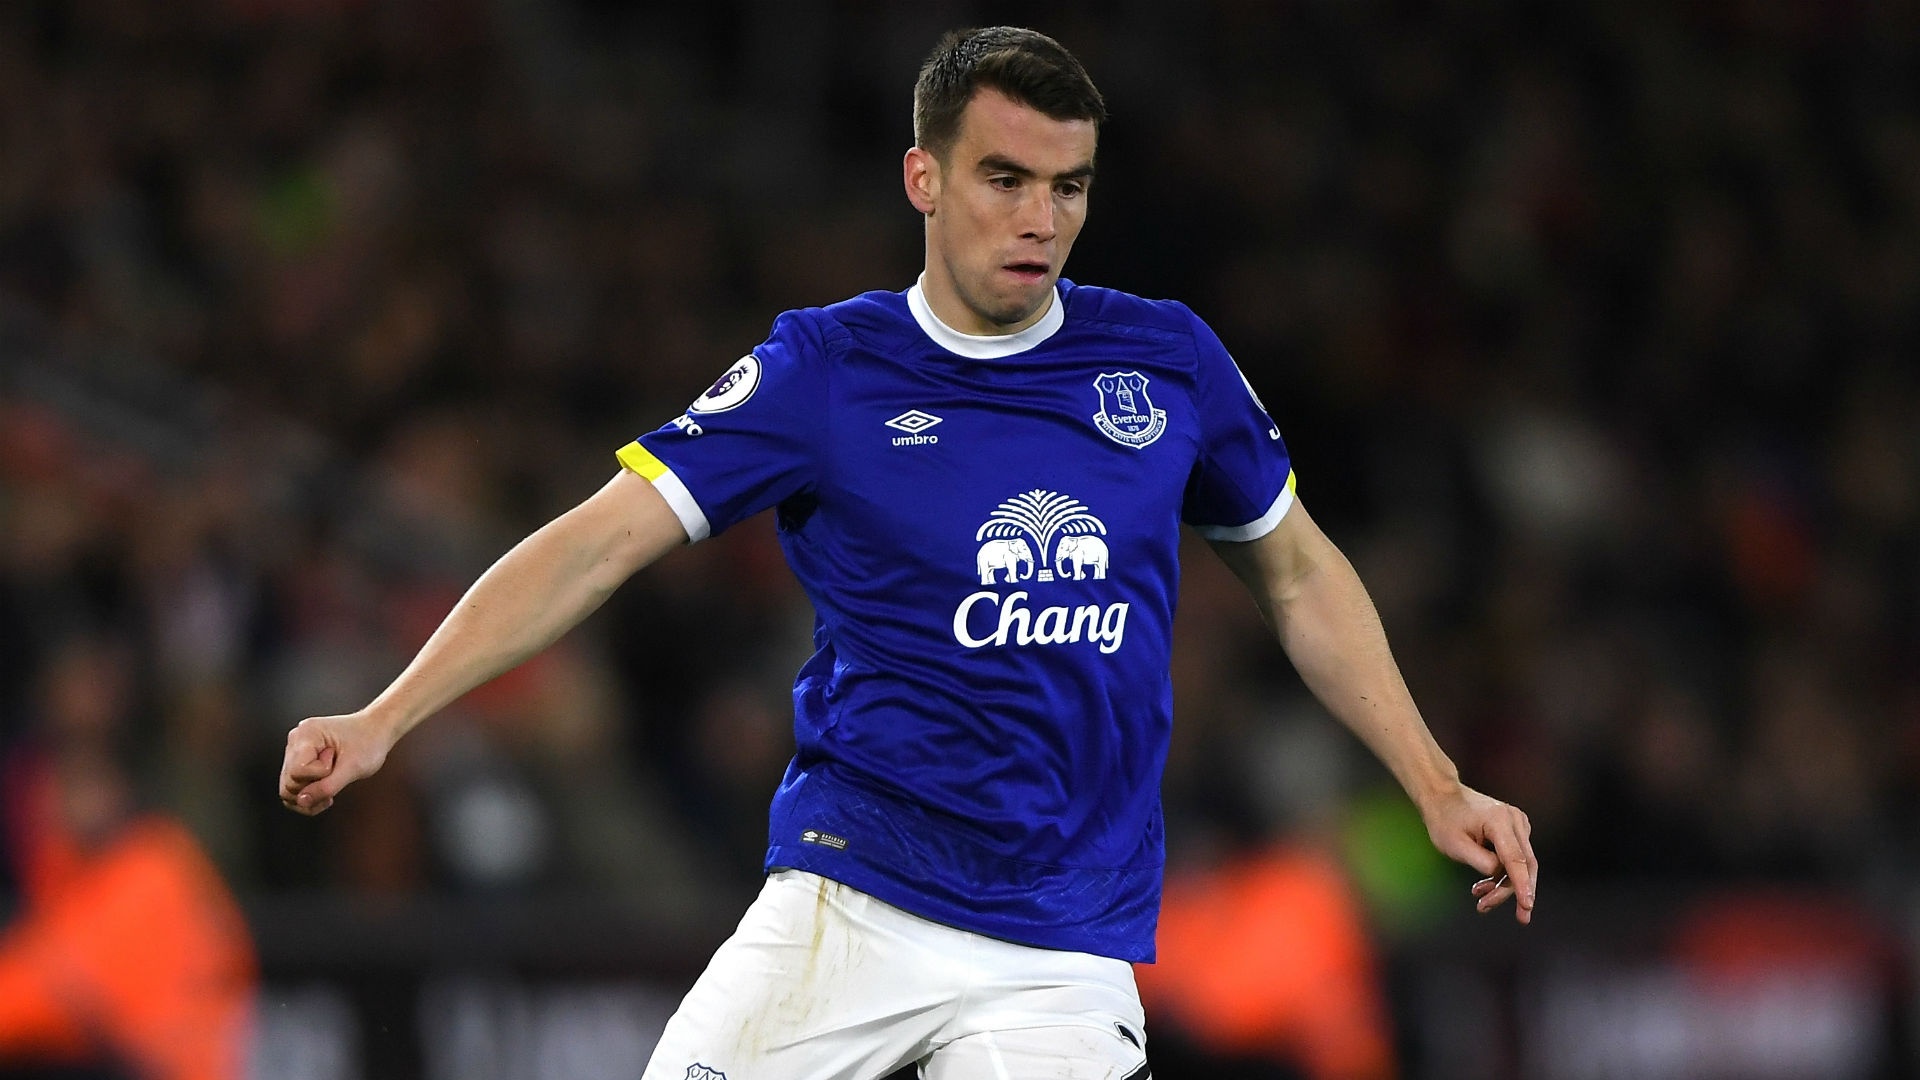 Jagielka: Everton want to win Merseyside derby for Coleman